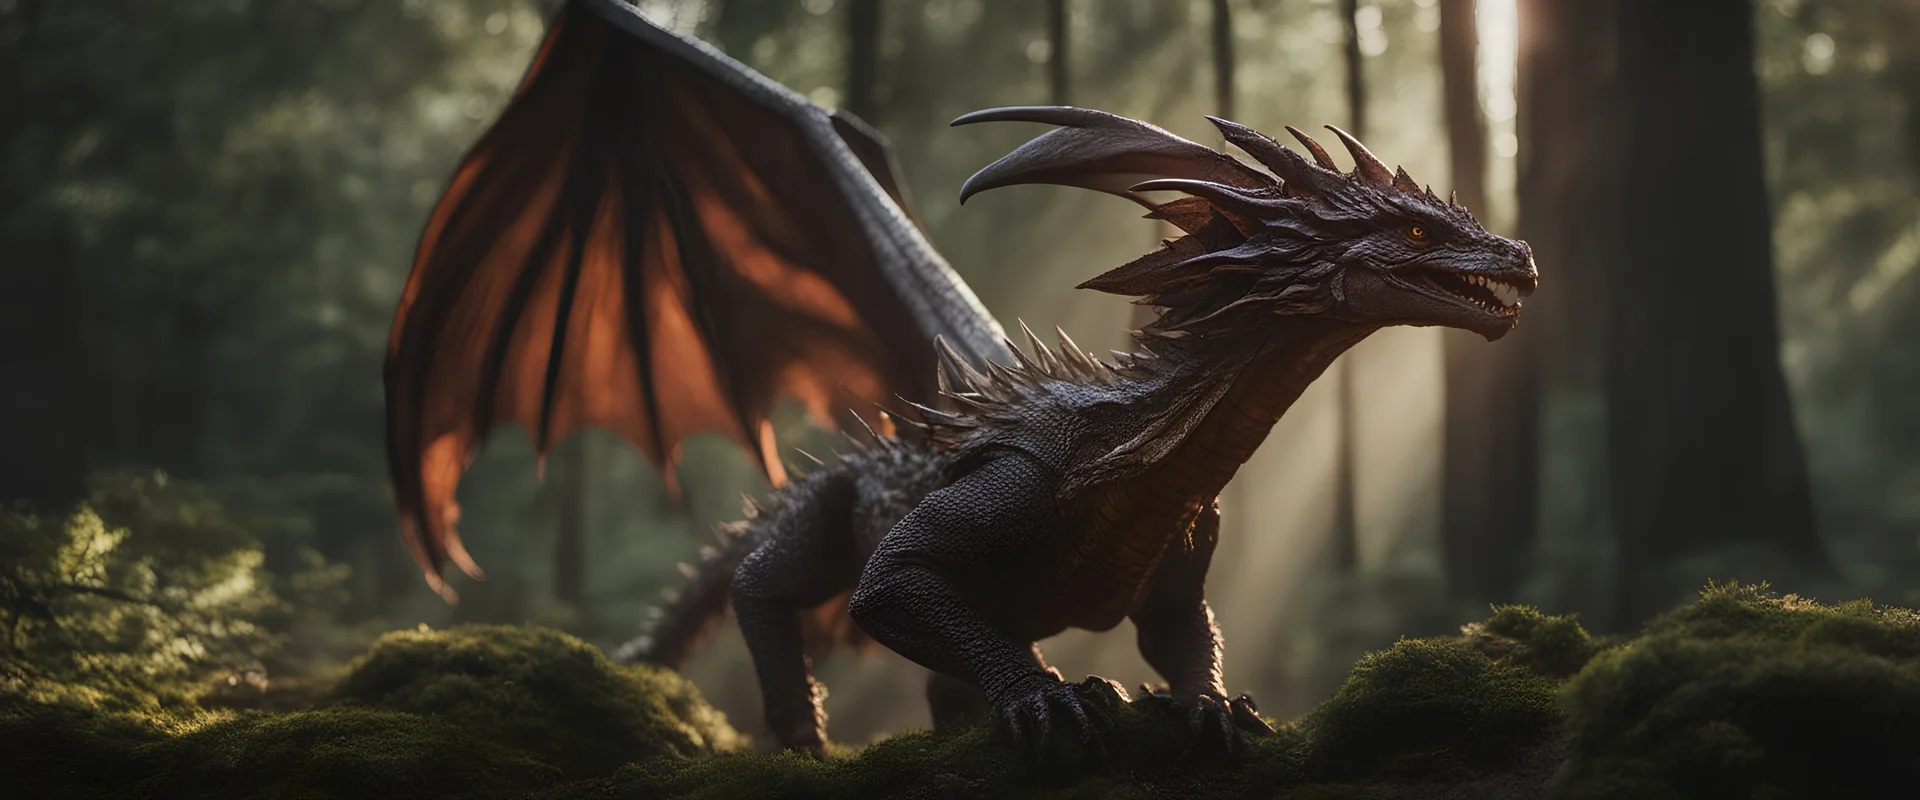 photoreal close-up of a magnificent firebreathing dragon at the edge of a forest by golden hour in the forgotten realms by lee jeffries, otherworldly , in the style of fantasy movies, photorealistic, shot on Hasselblad h6d-400c, zeiss prime lens, bokeh like f/0.8, tilt-shift lens 8k, high detail, smooth render, unreal engine 5, cinema 4d, HDR, dust effect, vivid colors